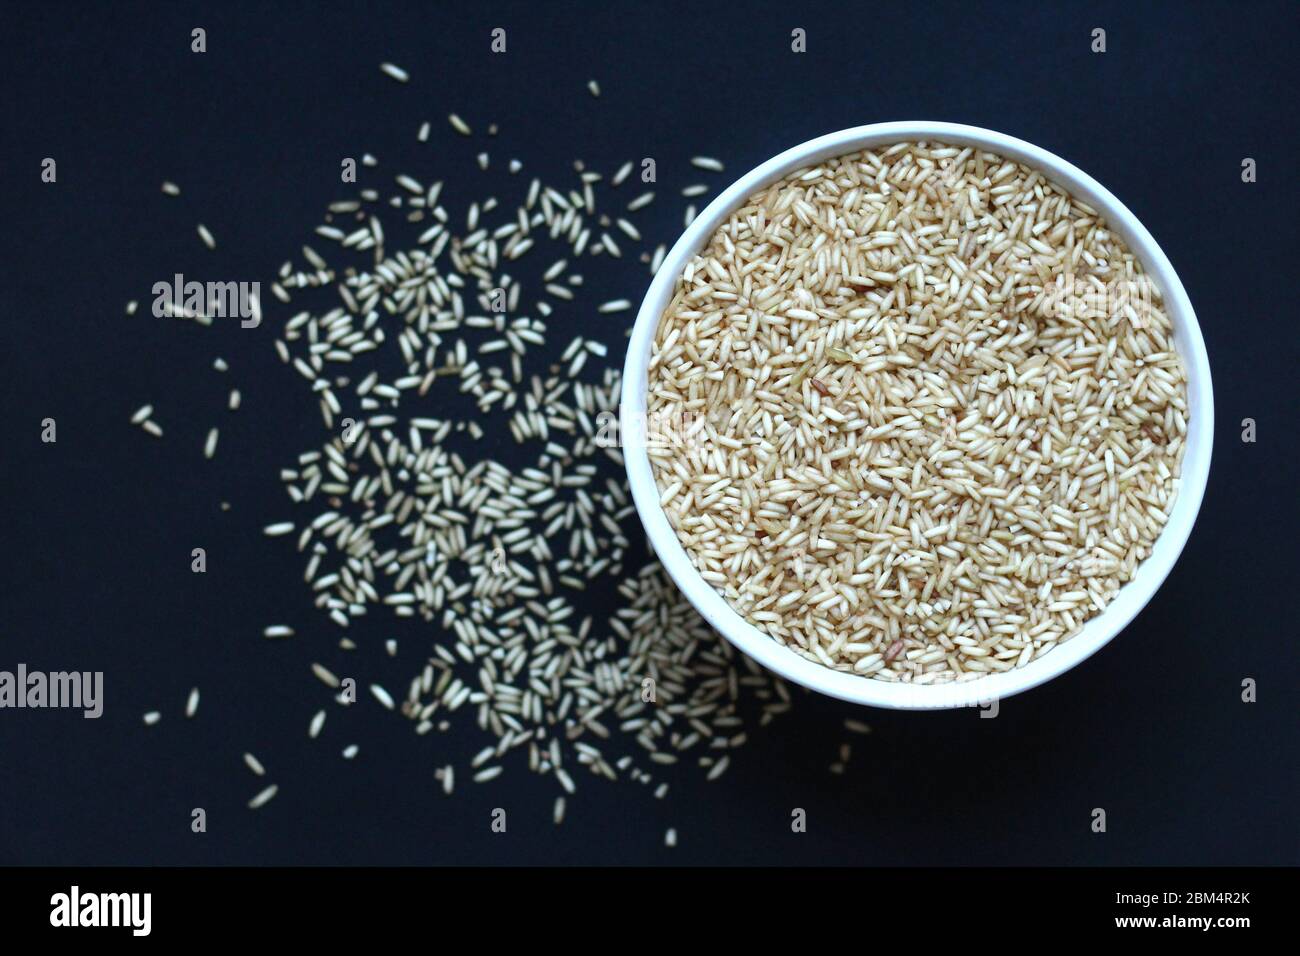 Brown rice grains in a white bowl on a dark background, seen from above Stock Photo